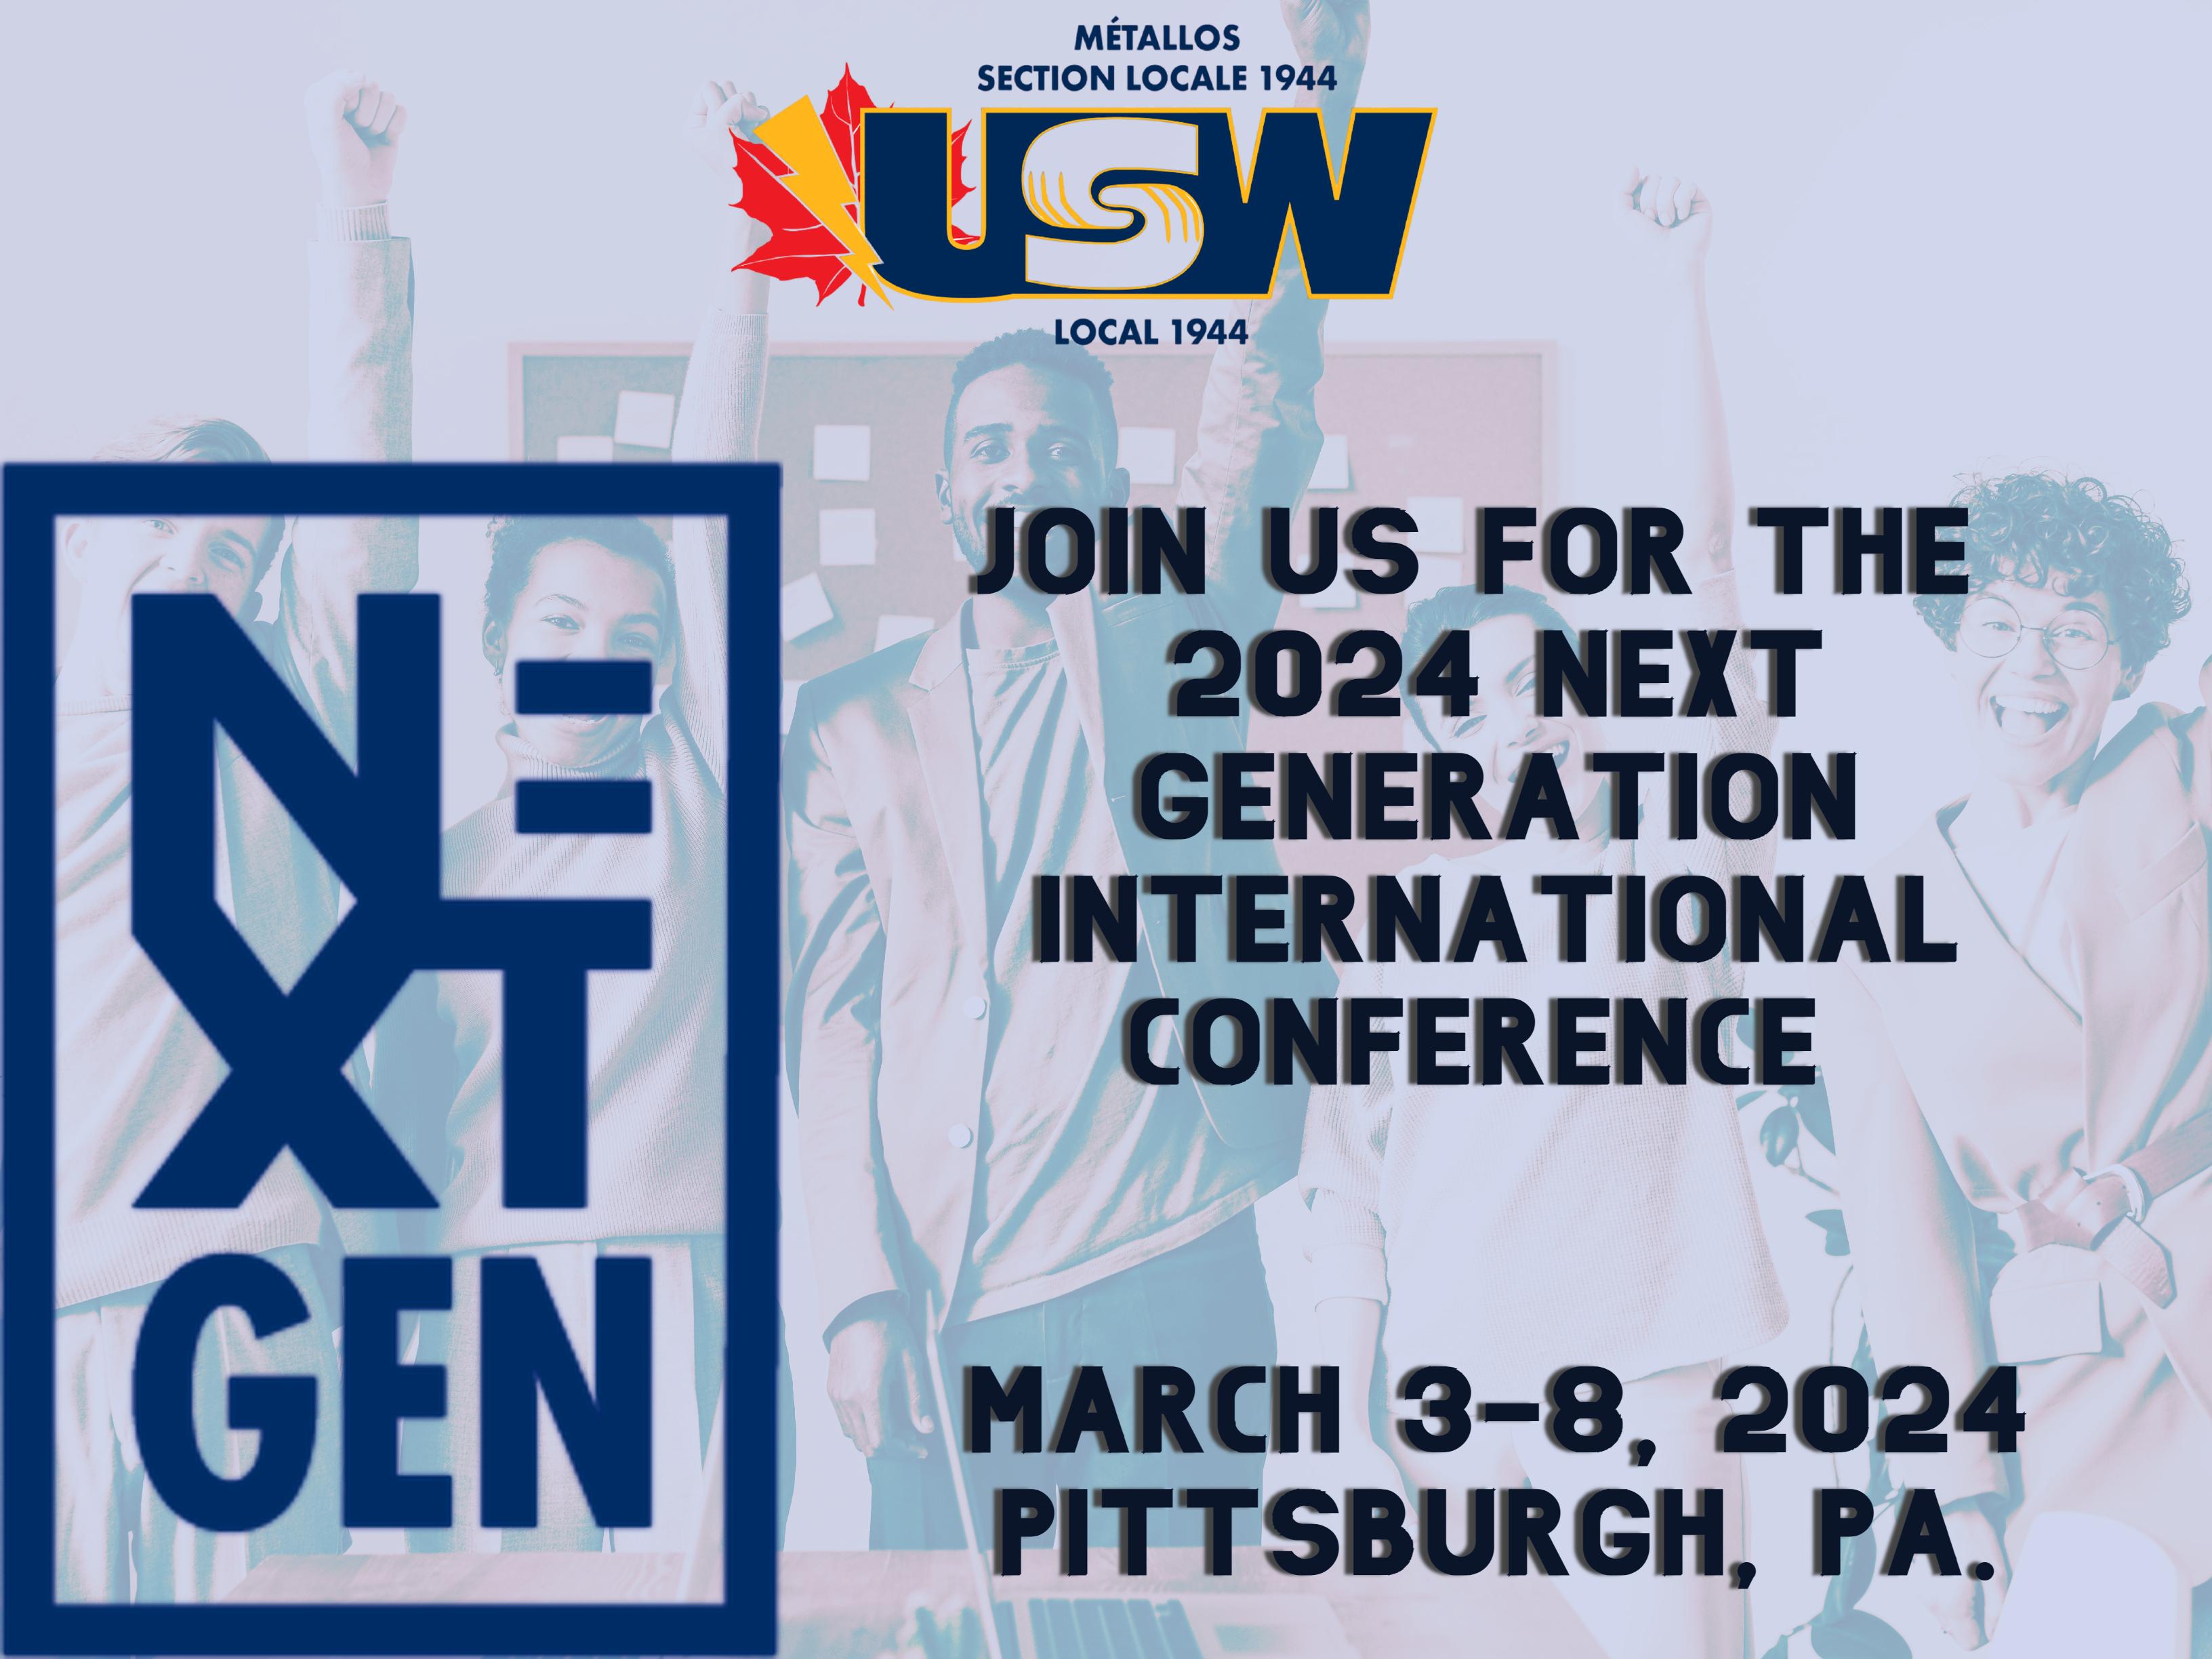 2024 Next Generation International Conference - Call for registrations ...